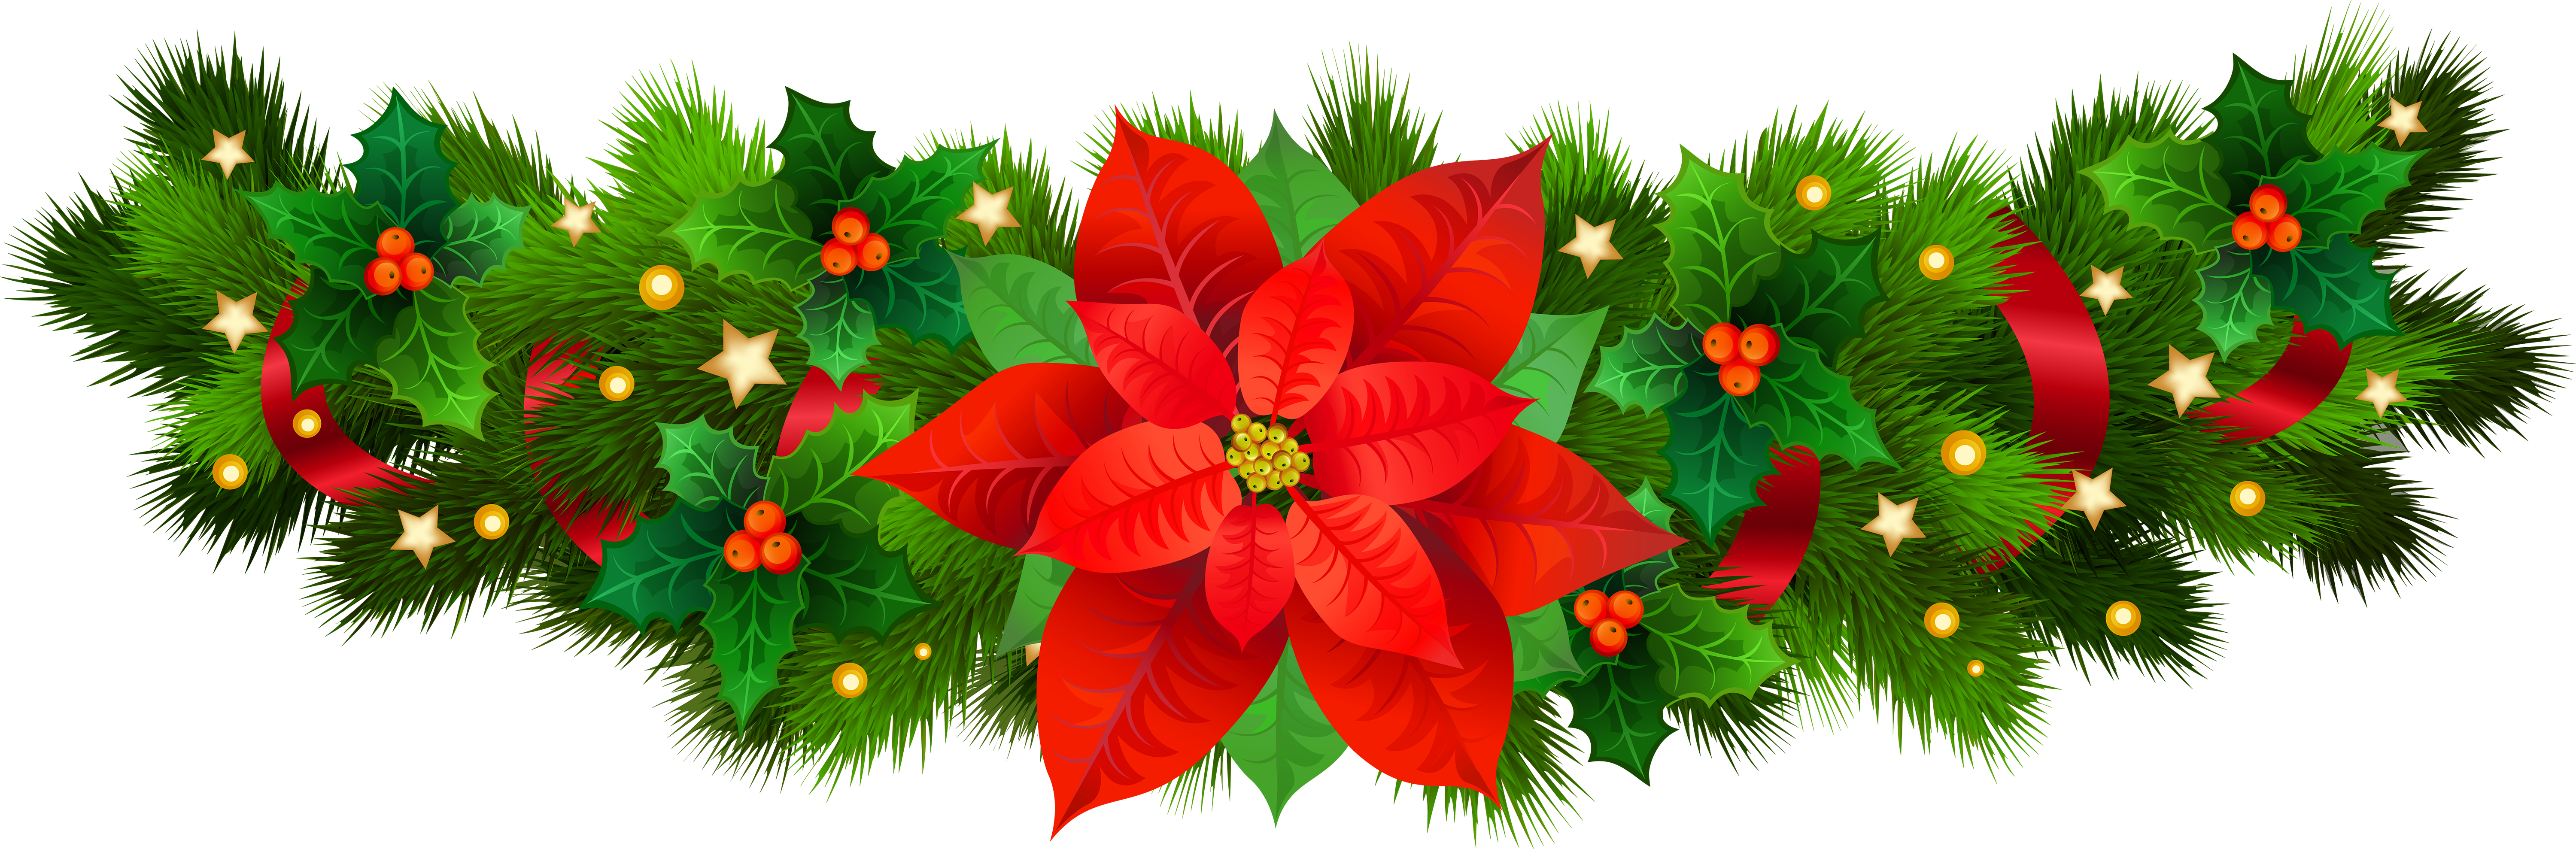 Christmas Decorative with Poinsettia PNG Clip Art Image​  Gallery  Yopriceville - High-Quality Free Images and Transparent PNG Clipart